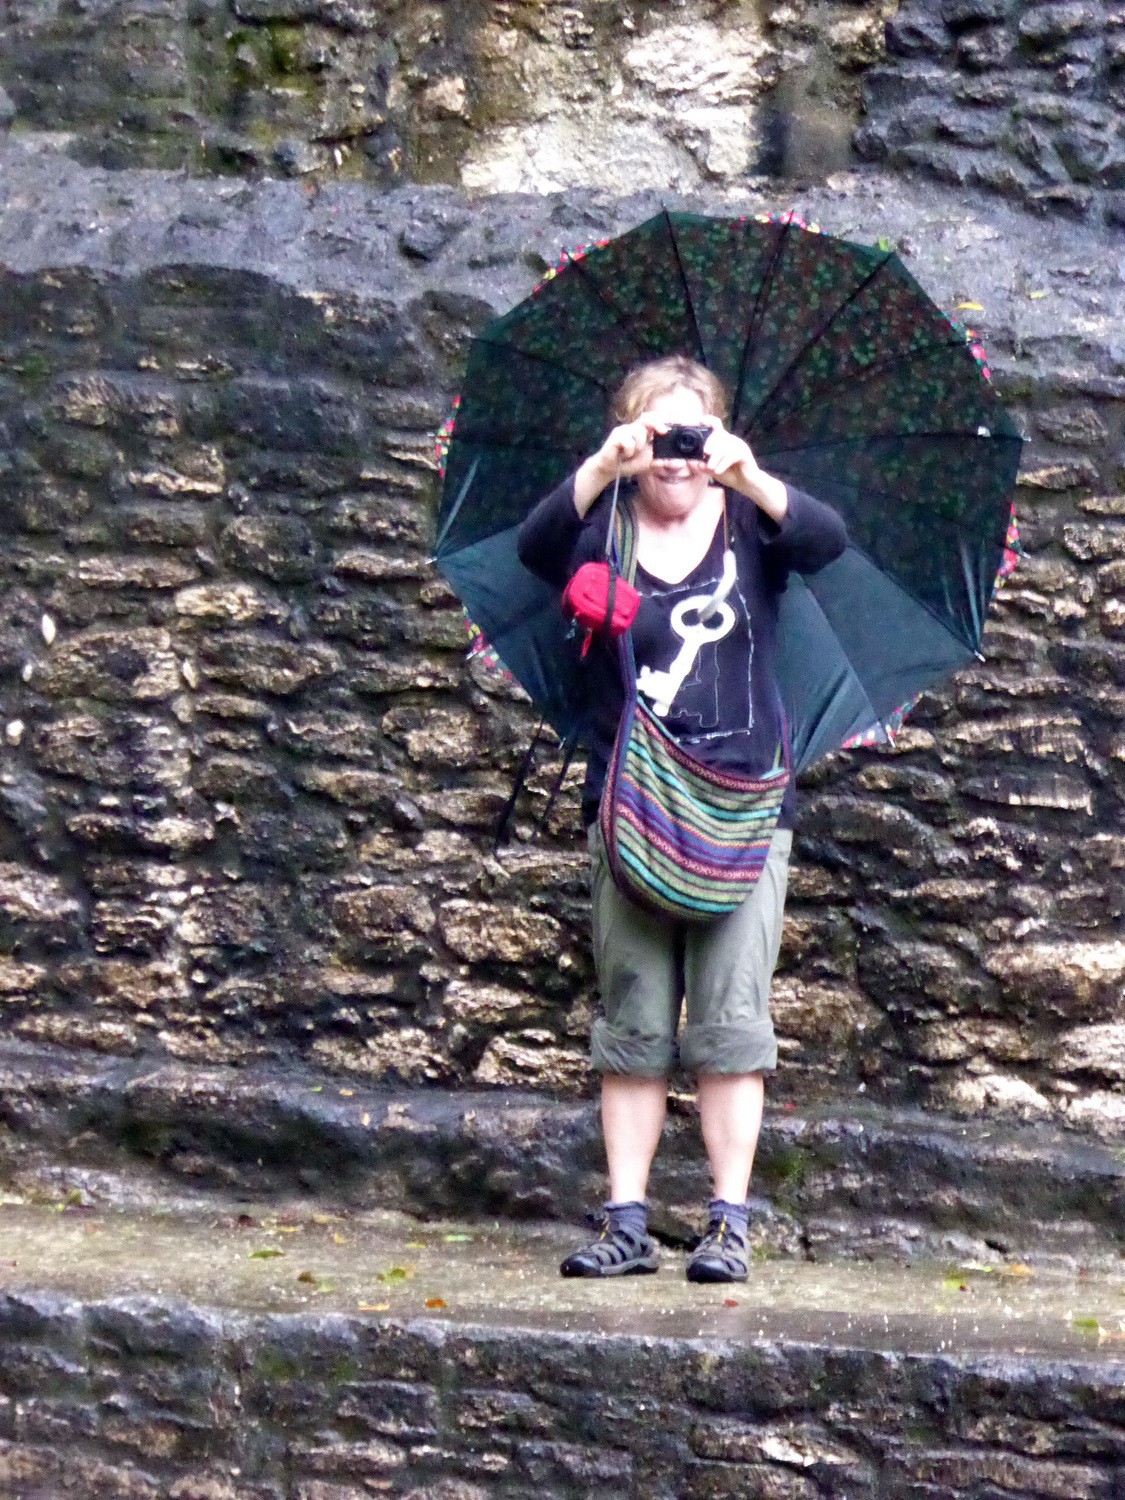 Marion taking a picture in the rain